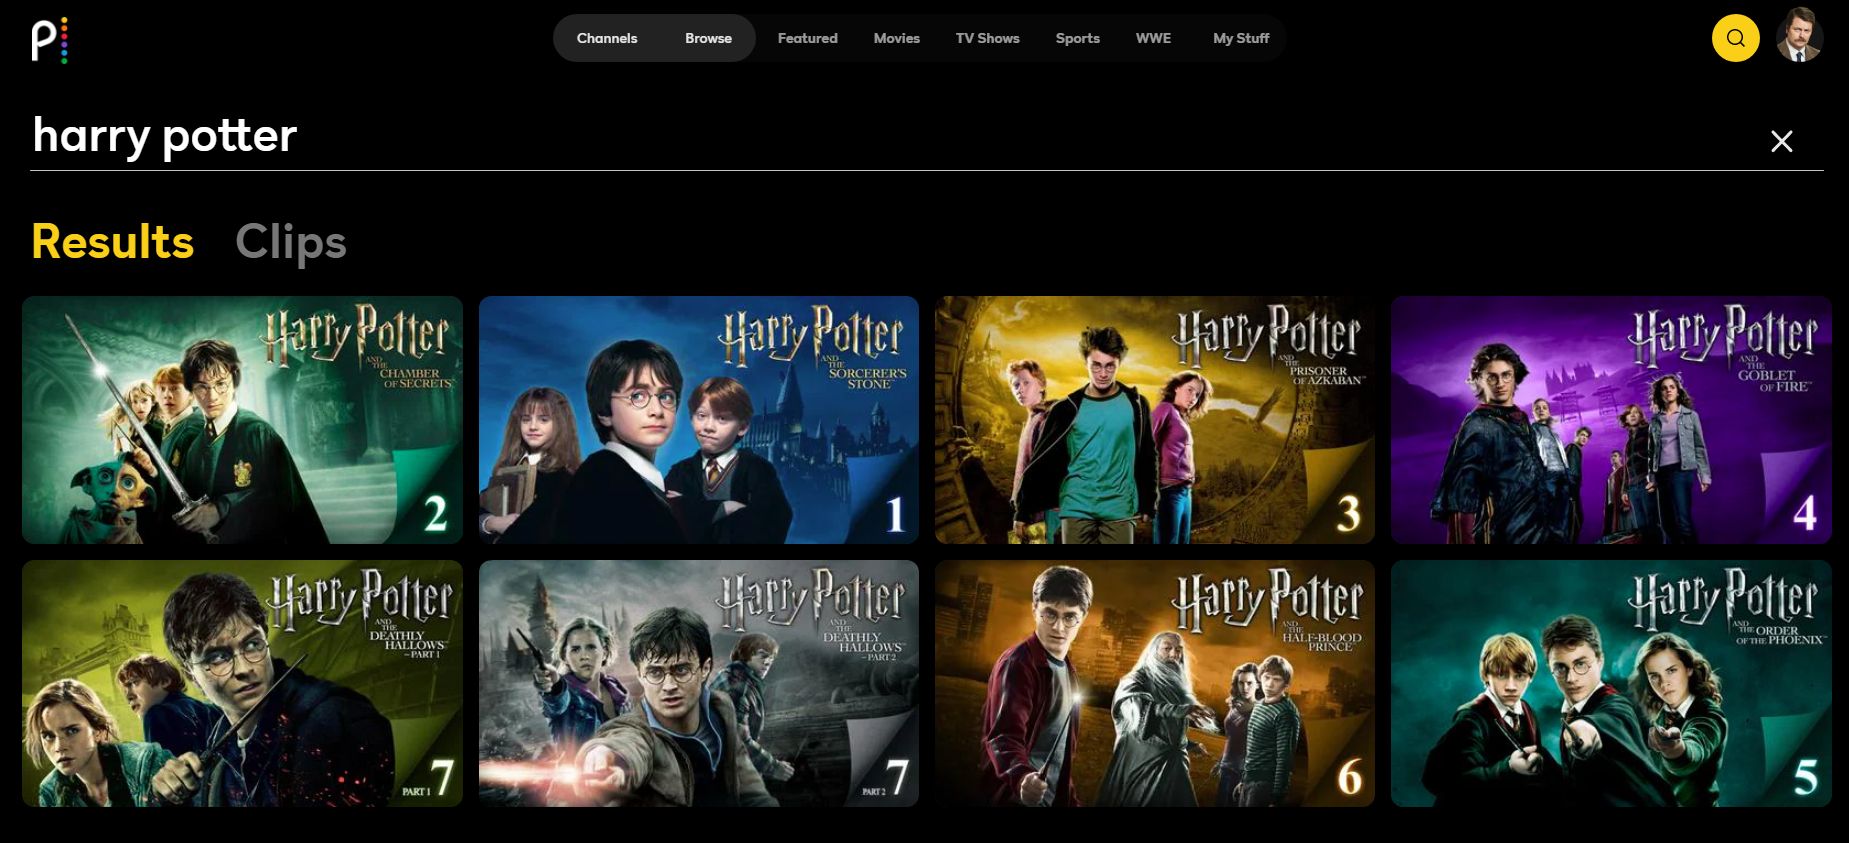 Harry Potter Stream 4k Where can I watch the Harry Potter movies? - Android Authority